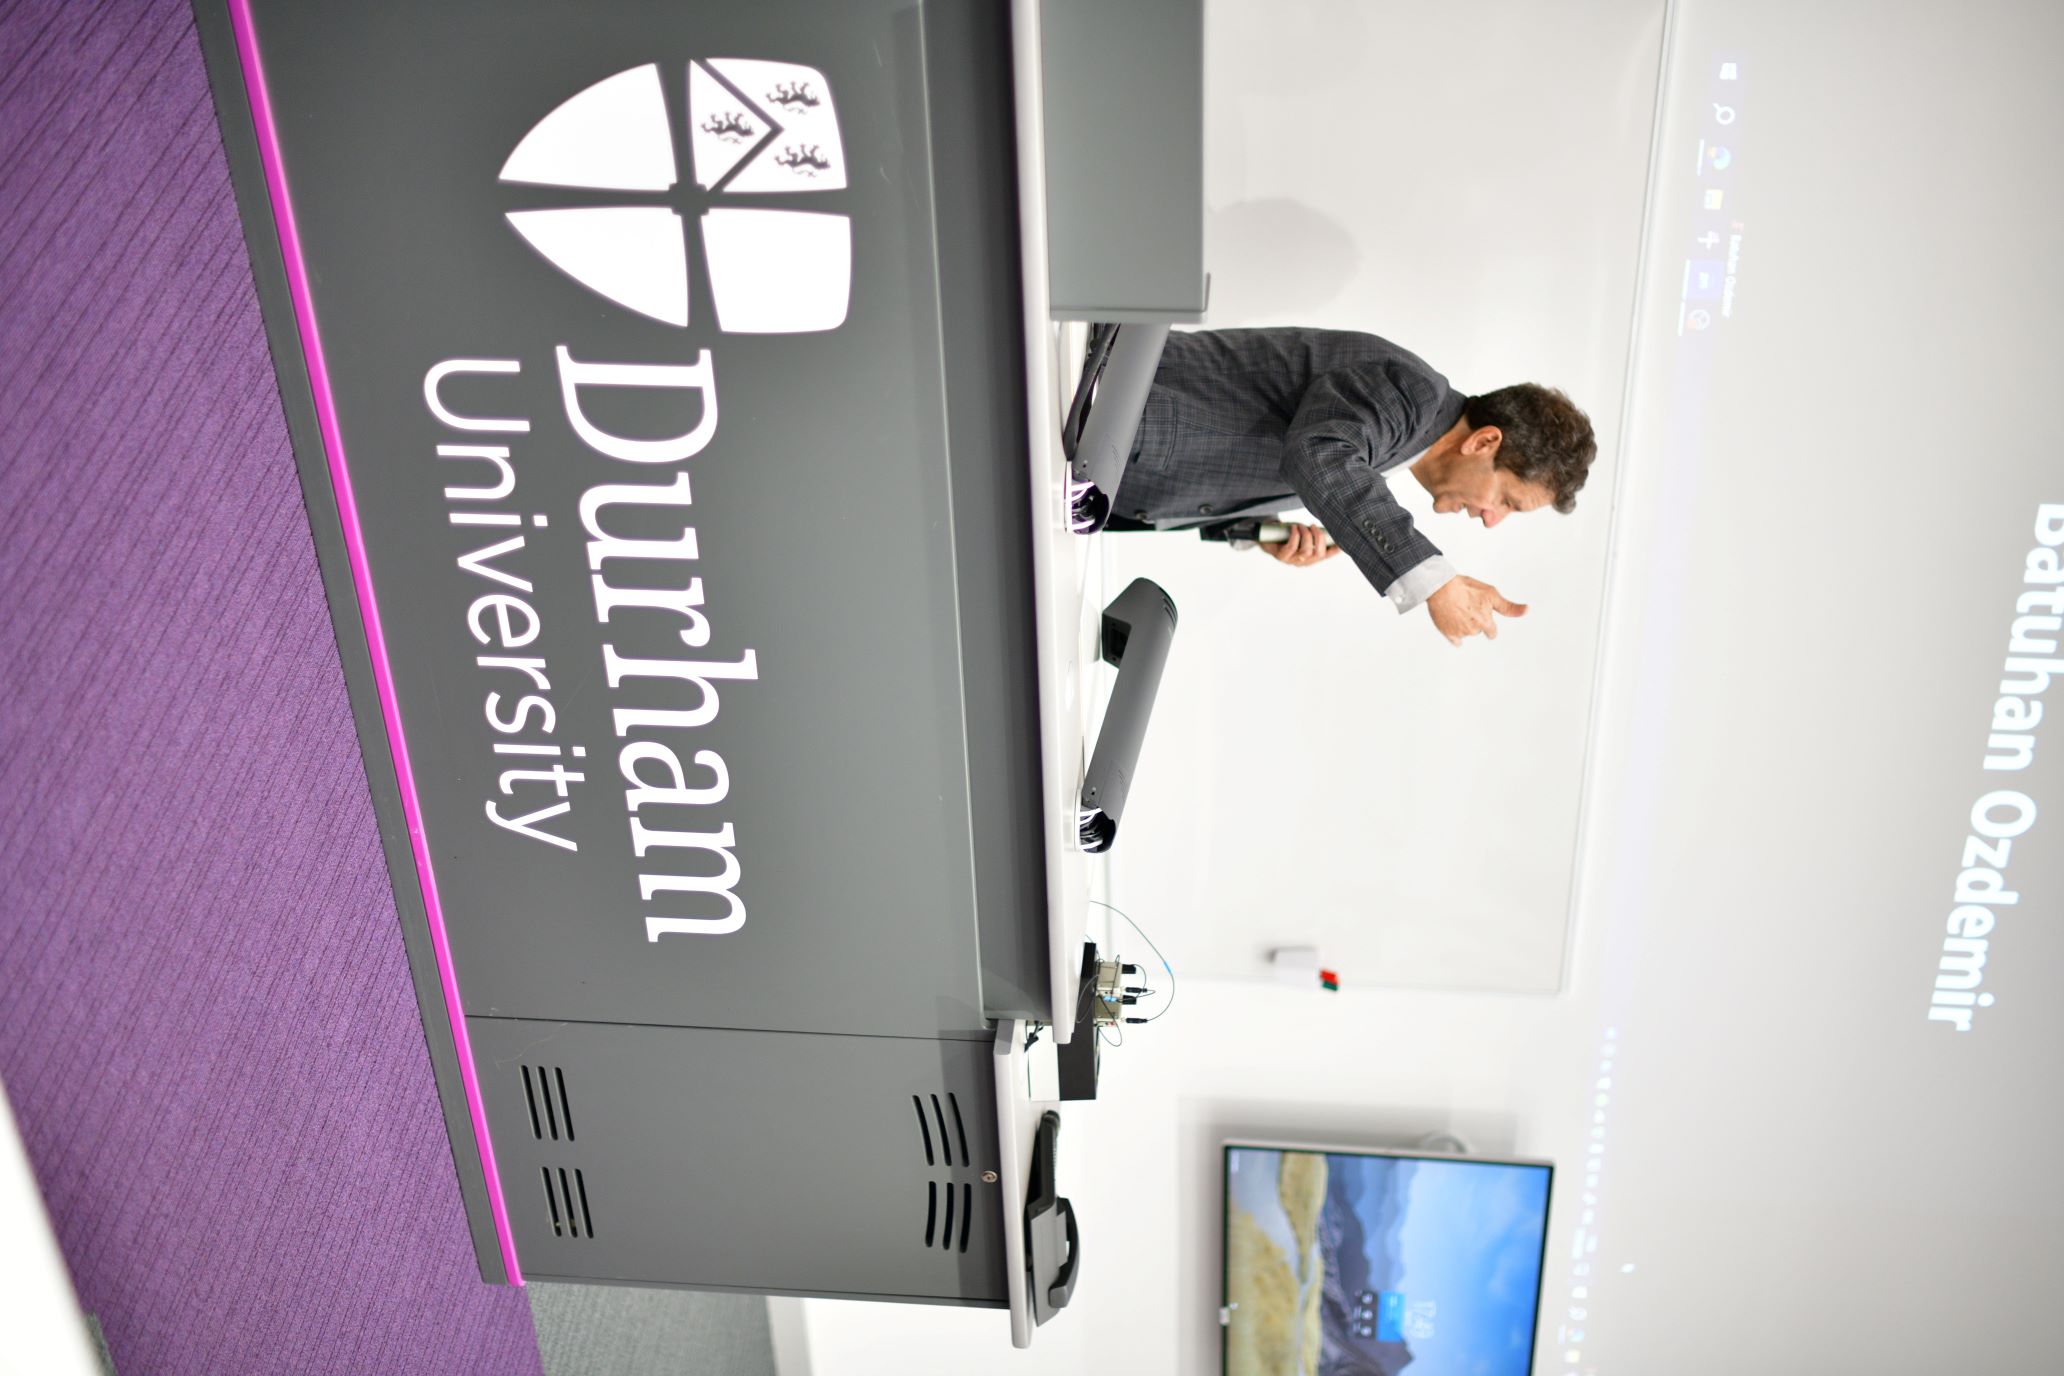 A man in a grey suit, standing behind a Durham University lecture podium, holding a microphone and presenting to an out-of-frame lecture theatre.